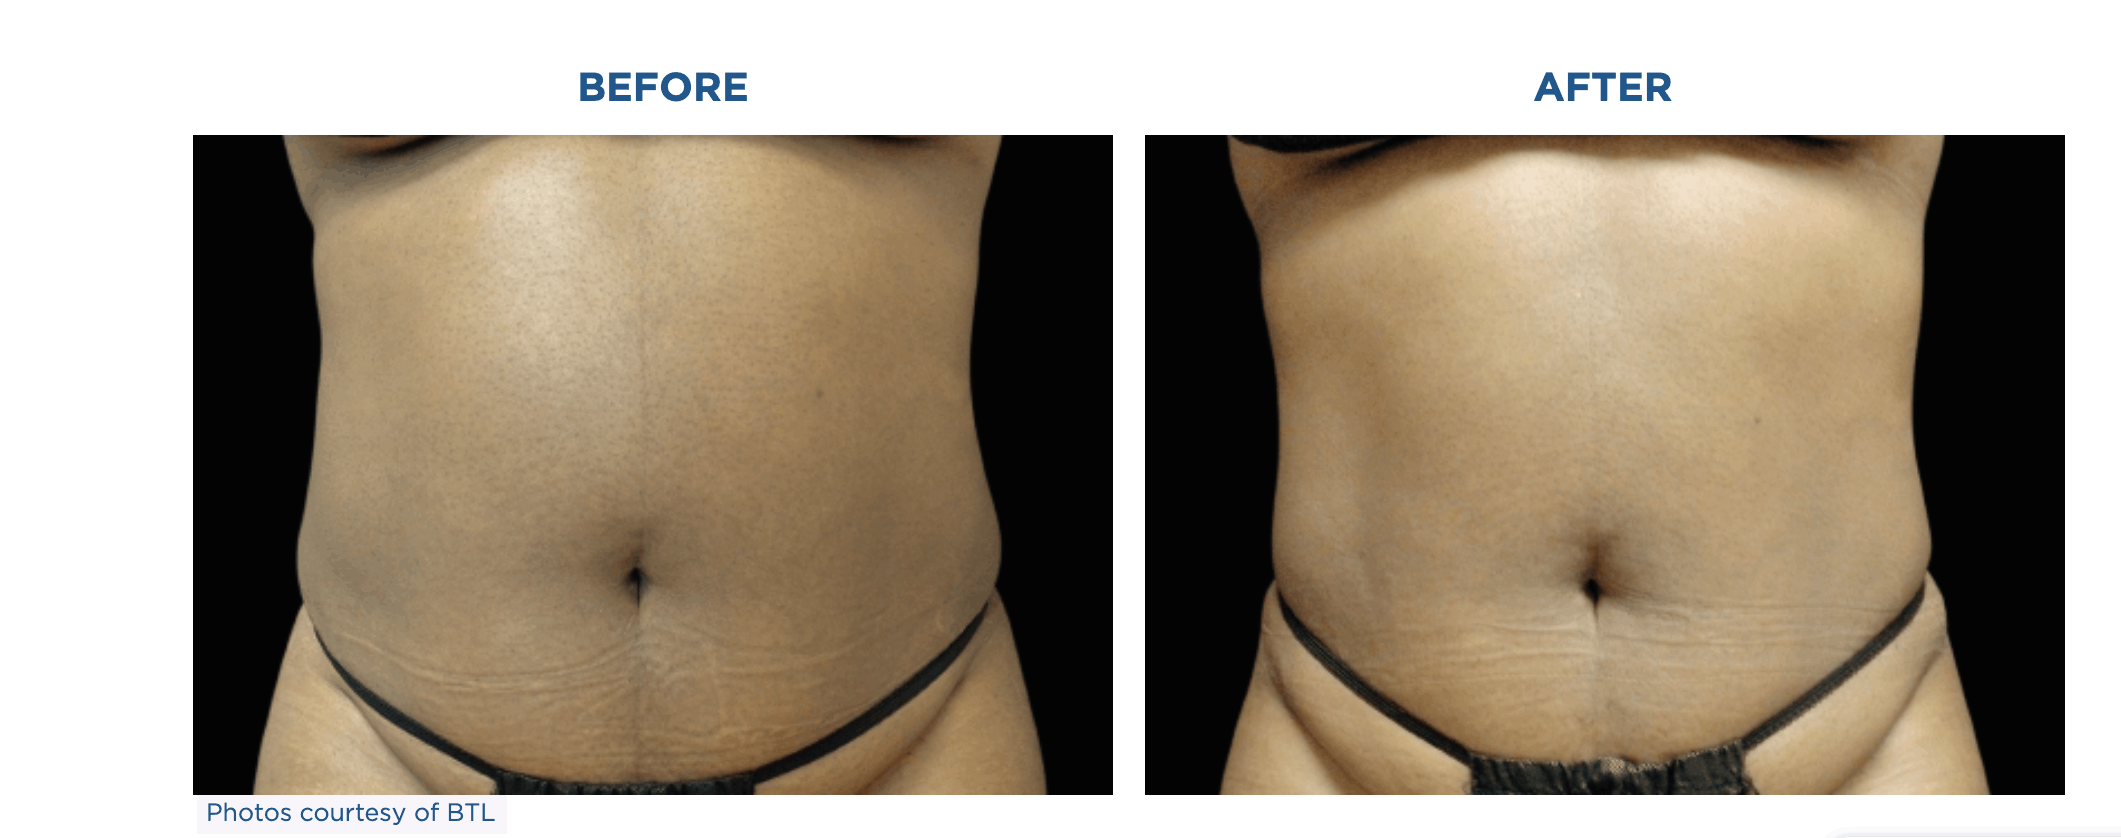 A woman's abdomen before and after undergoing Emsculpt Neo treatment for liposuction.